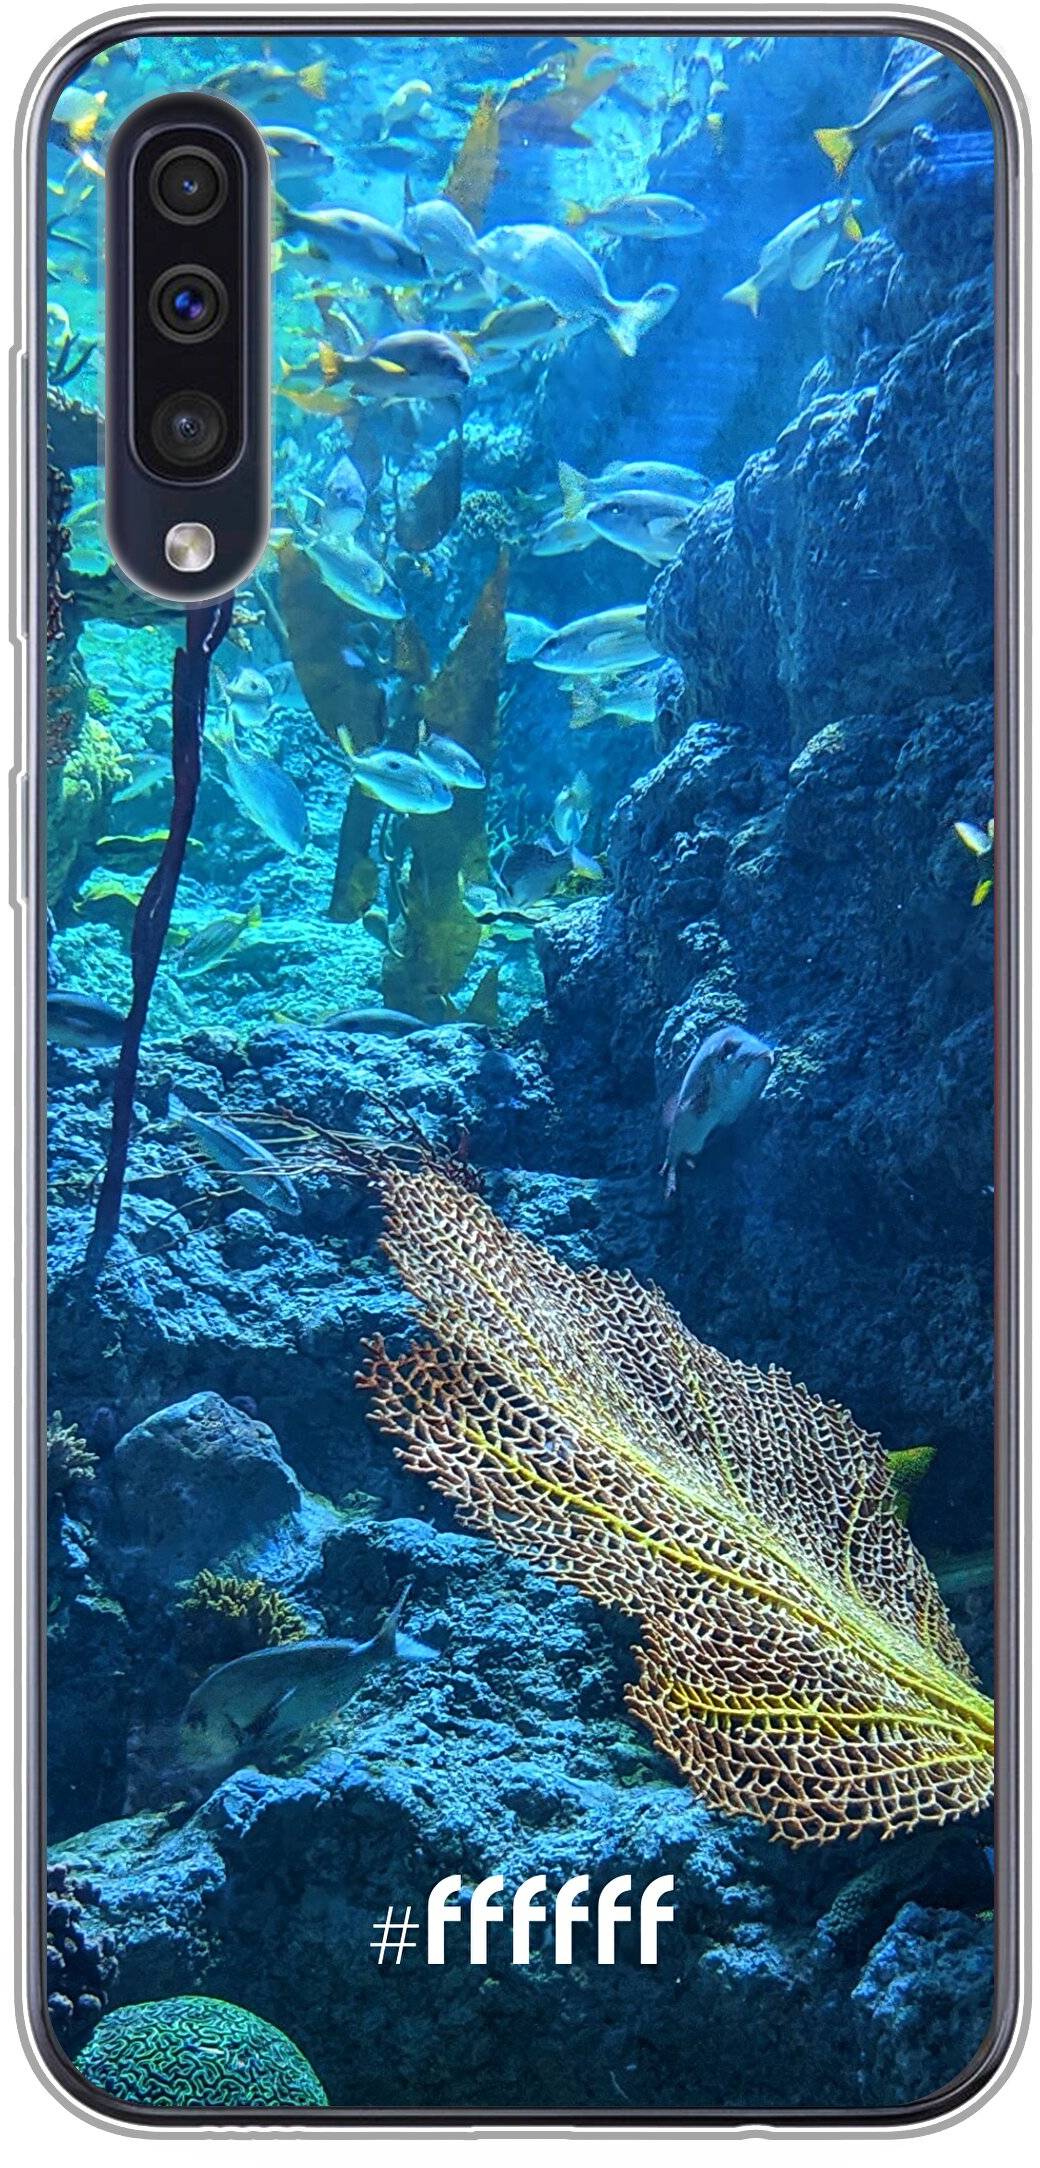 Coral Reef Galaxy A50s